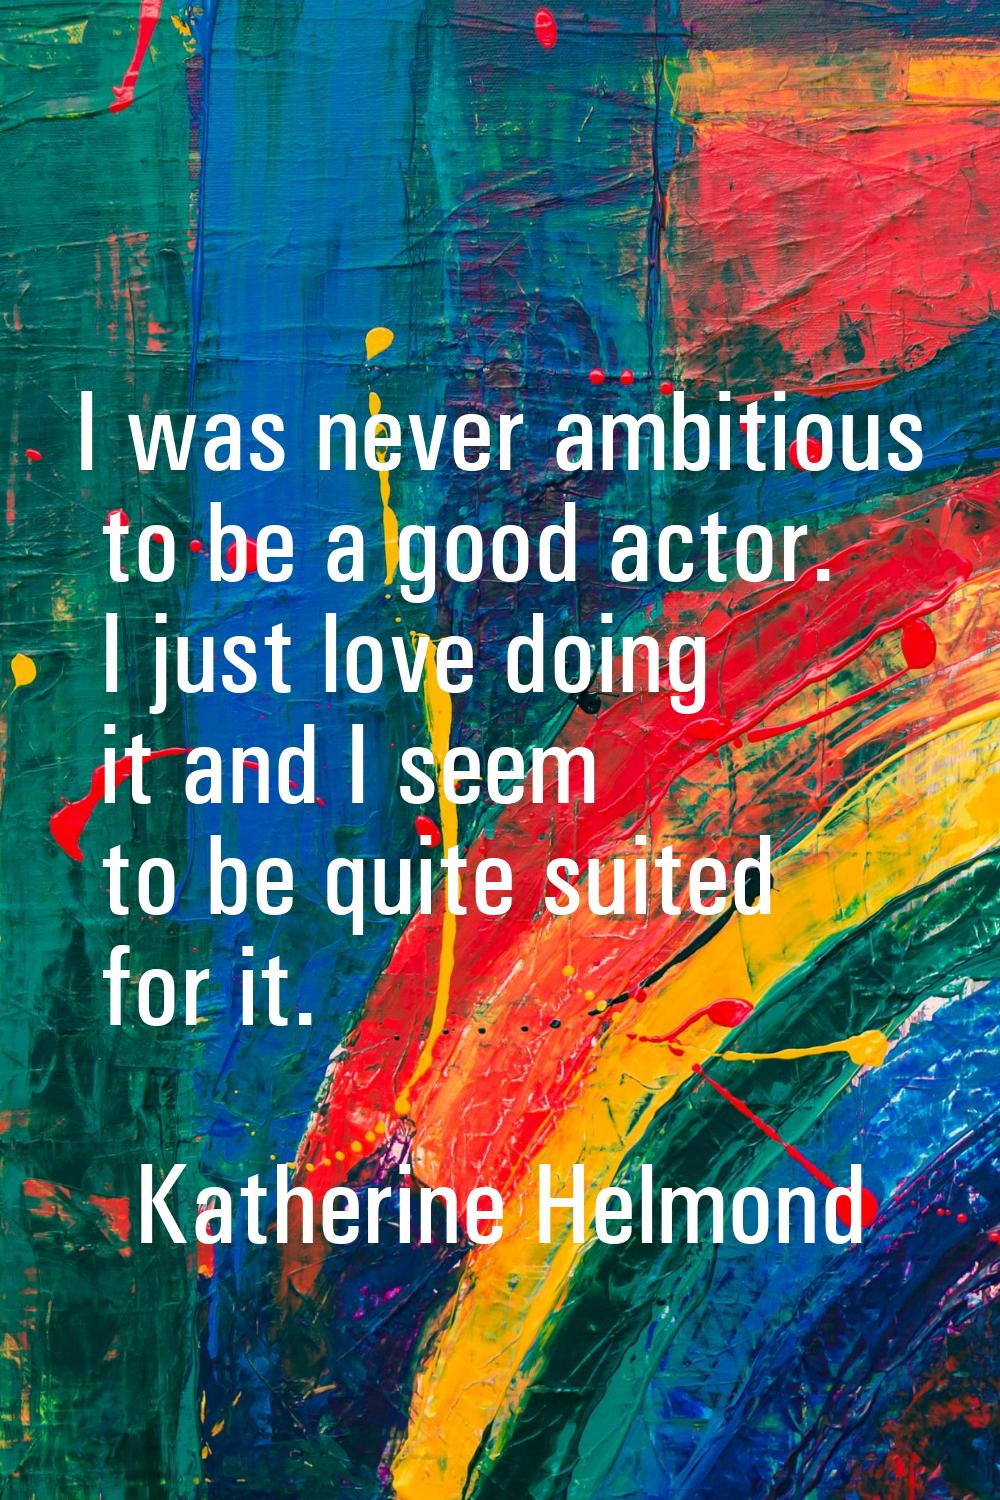 I was never ambitious to be a good actor. I just love doing it and I seem to be quite suited for it